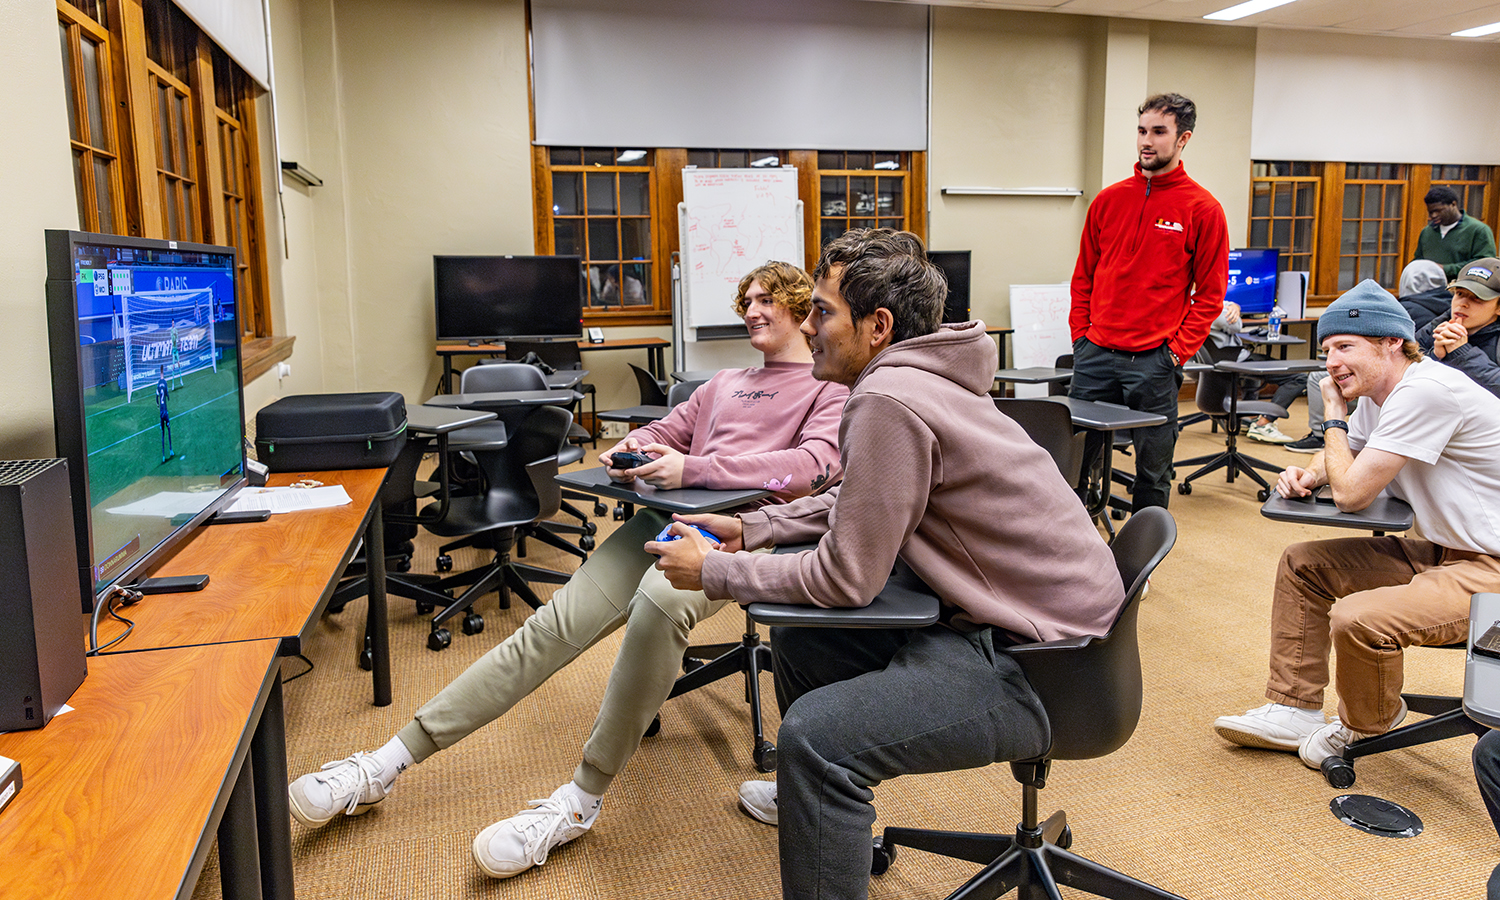 In Coxe Hall, students take part in the EA FC 24 tournament hosted by the Gaming Club.